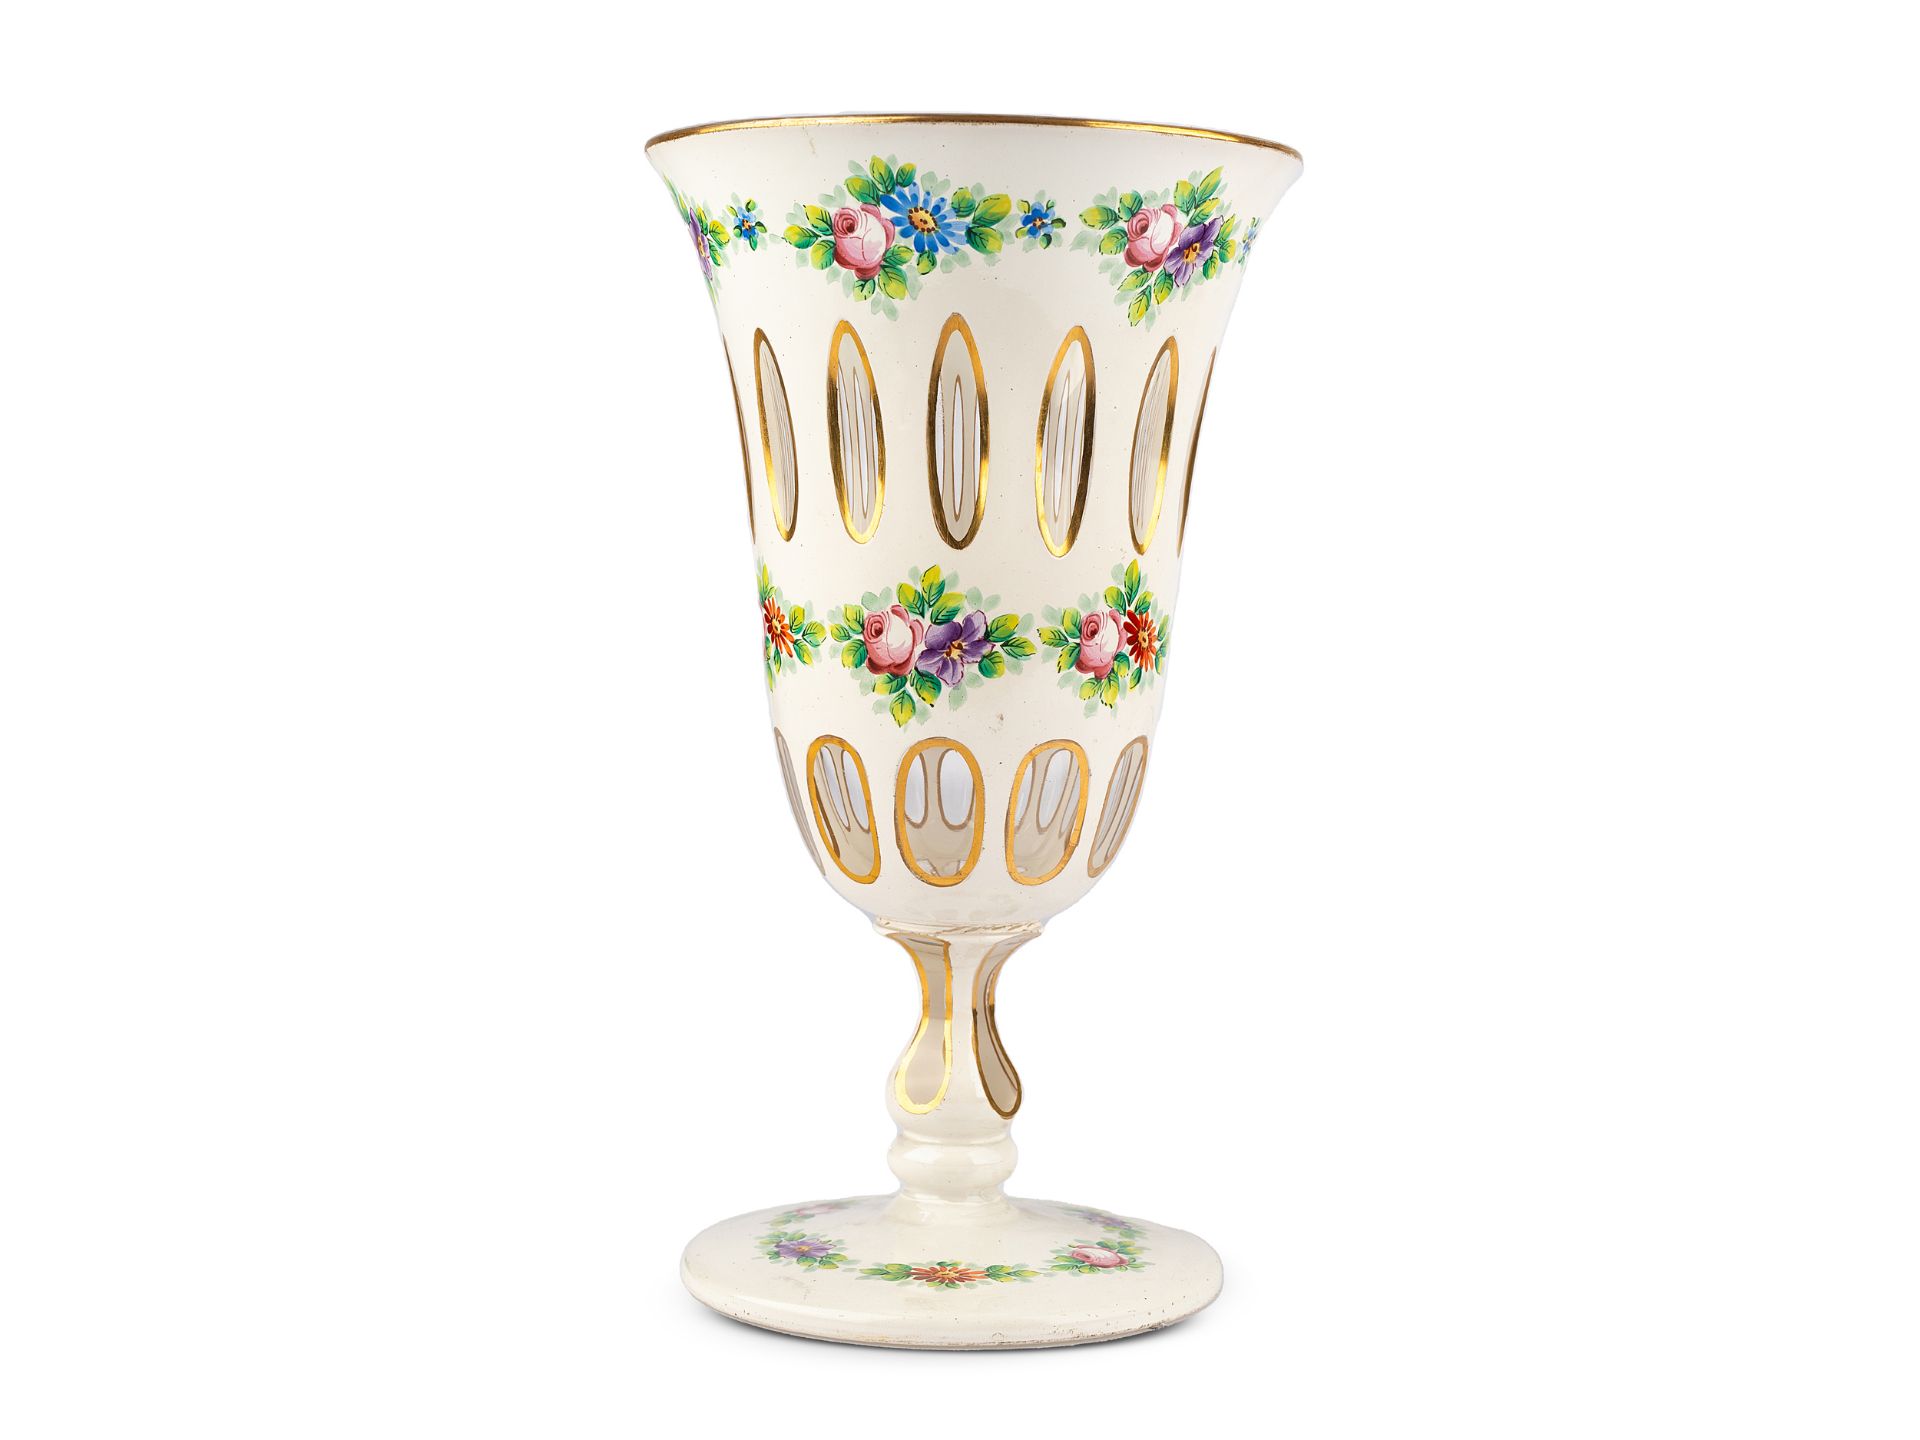 Biedermeier cup with floral motifs, Around 1840, Colourless glass, white overlay, gold-painted - Image 2 of 3